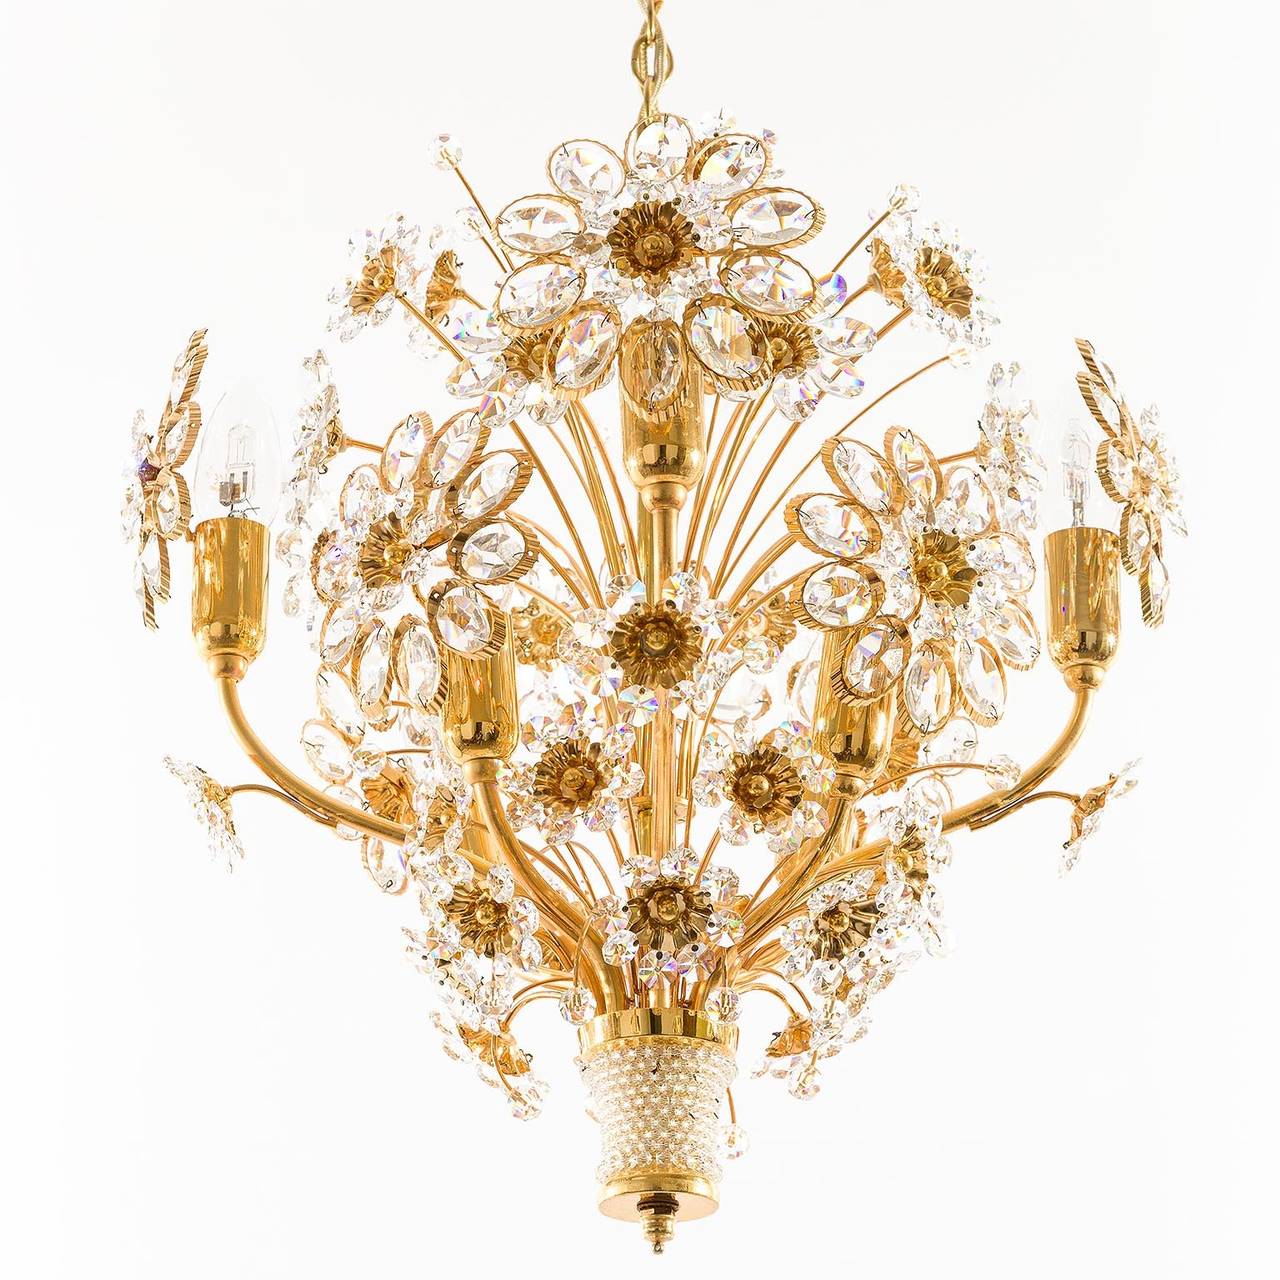 Mid-Century Modern Palwa Pendant Light or Chandelier, Gilt Brass and Glass Crystal, Germany, 1960s